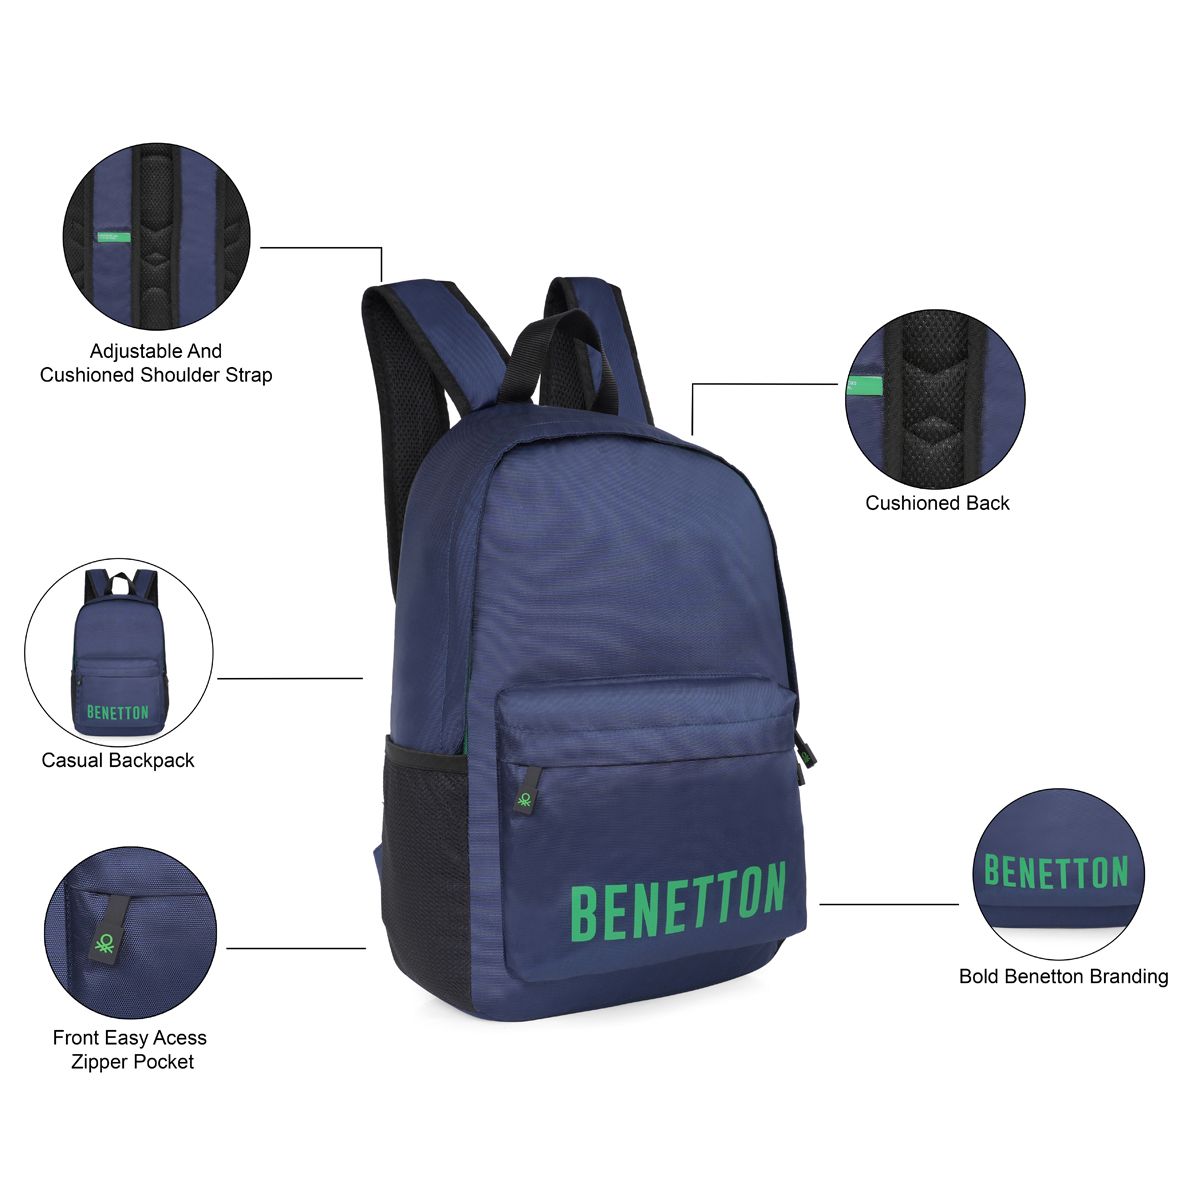 United Colors of Benetton Willow Laptop Backpack navy